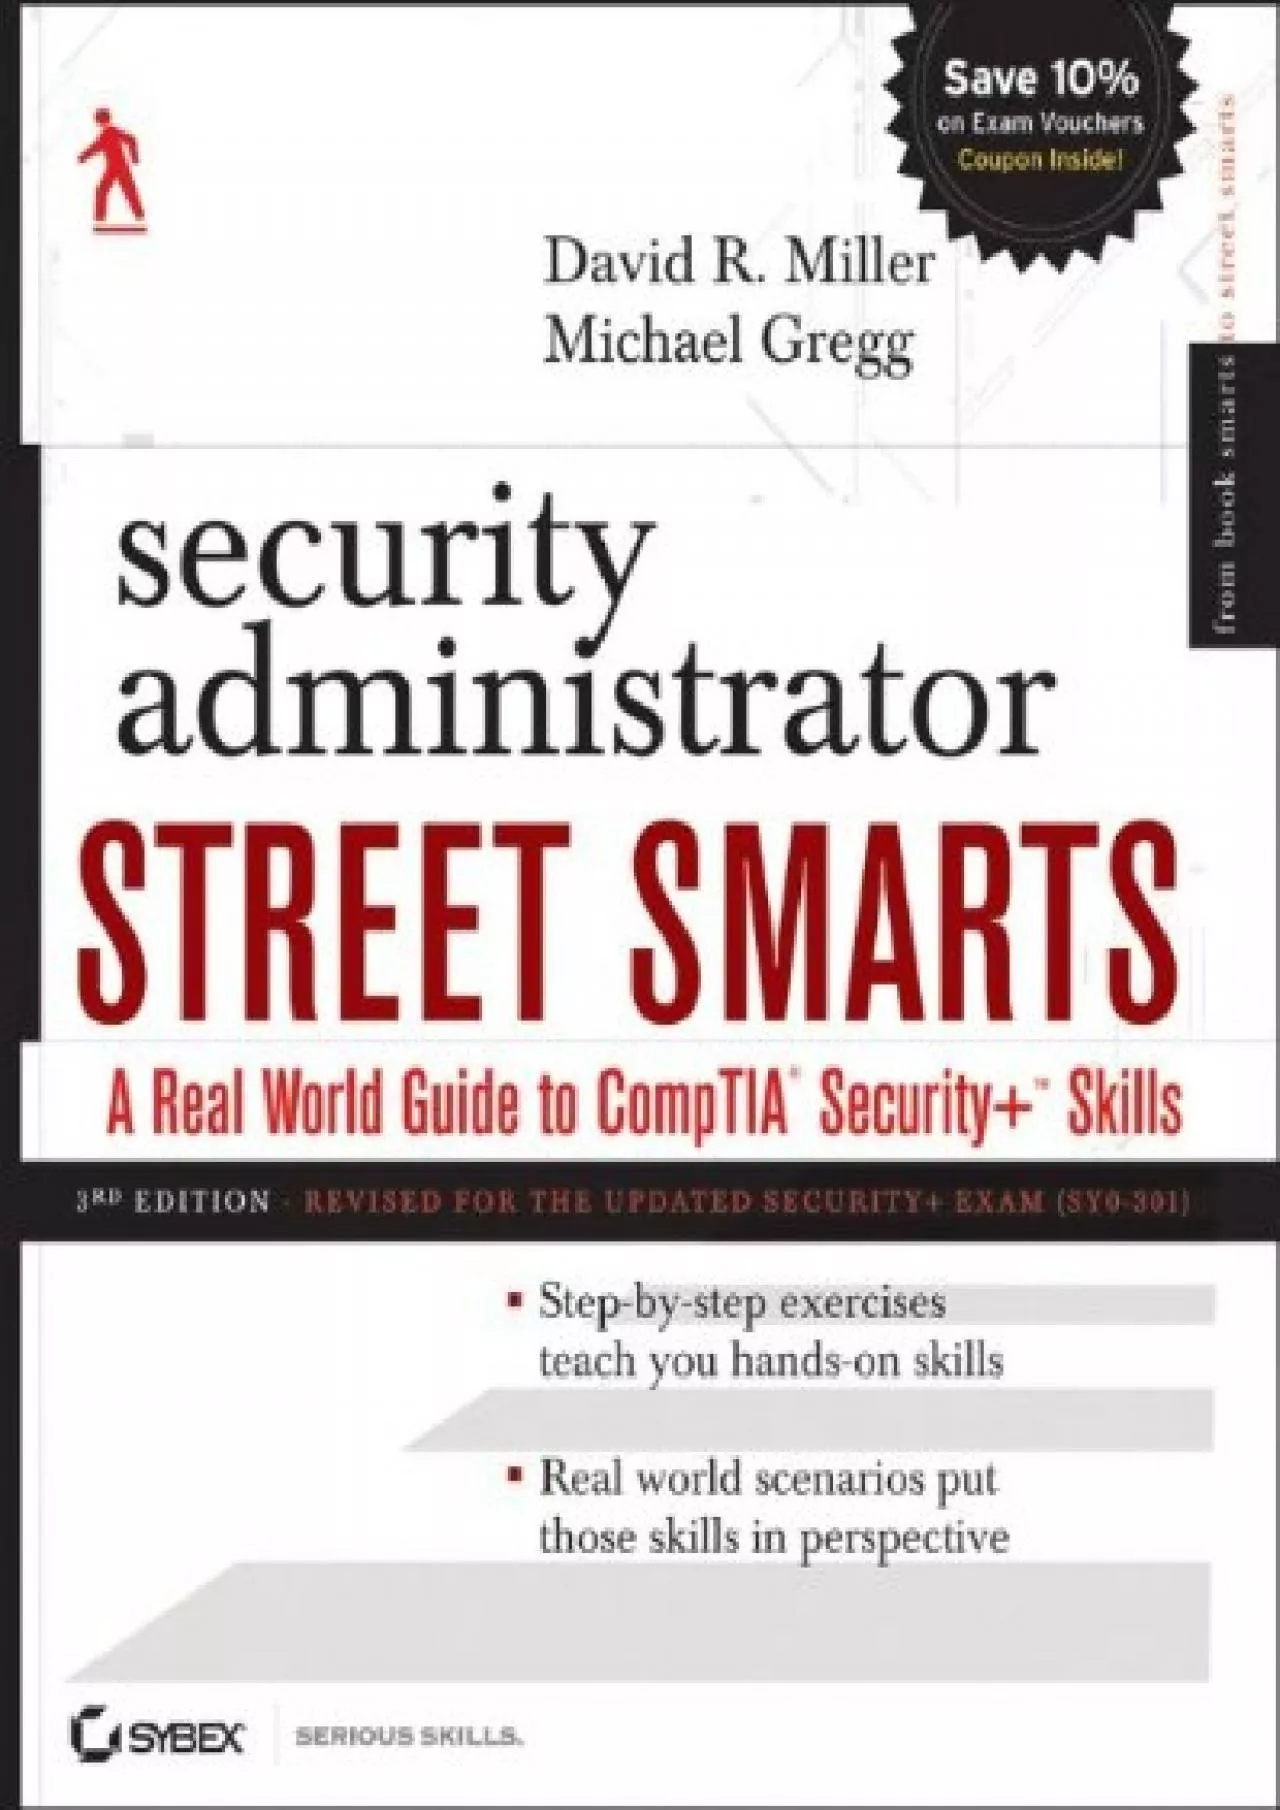 [READING BOOK]-Security Administrator Street Smarts: A Real World Guide to CompTIA Security+